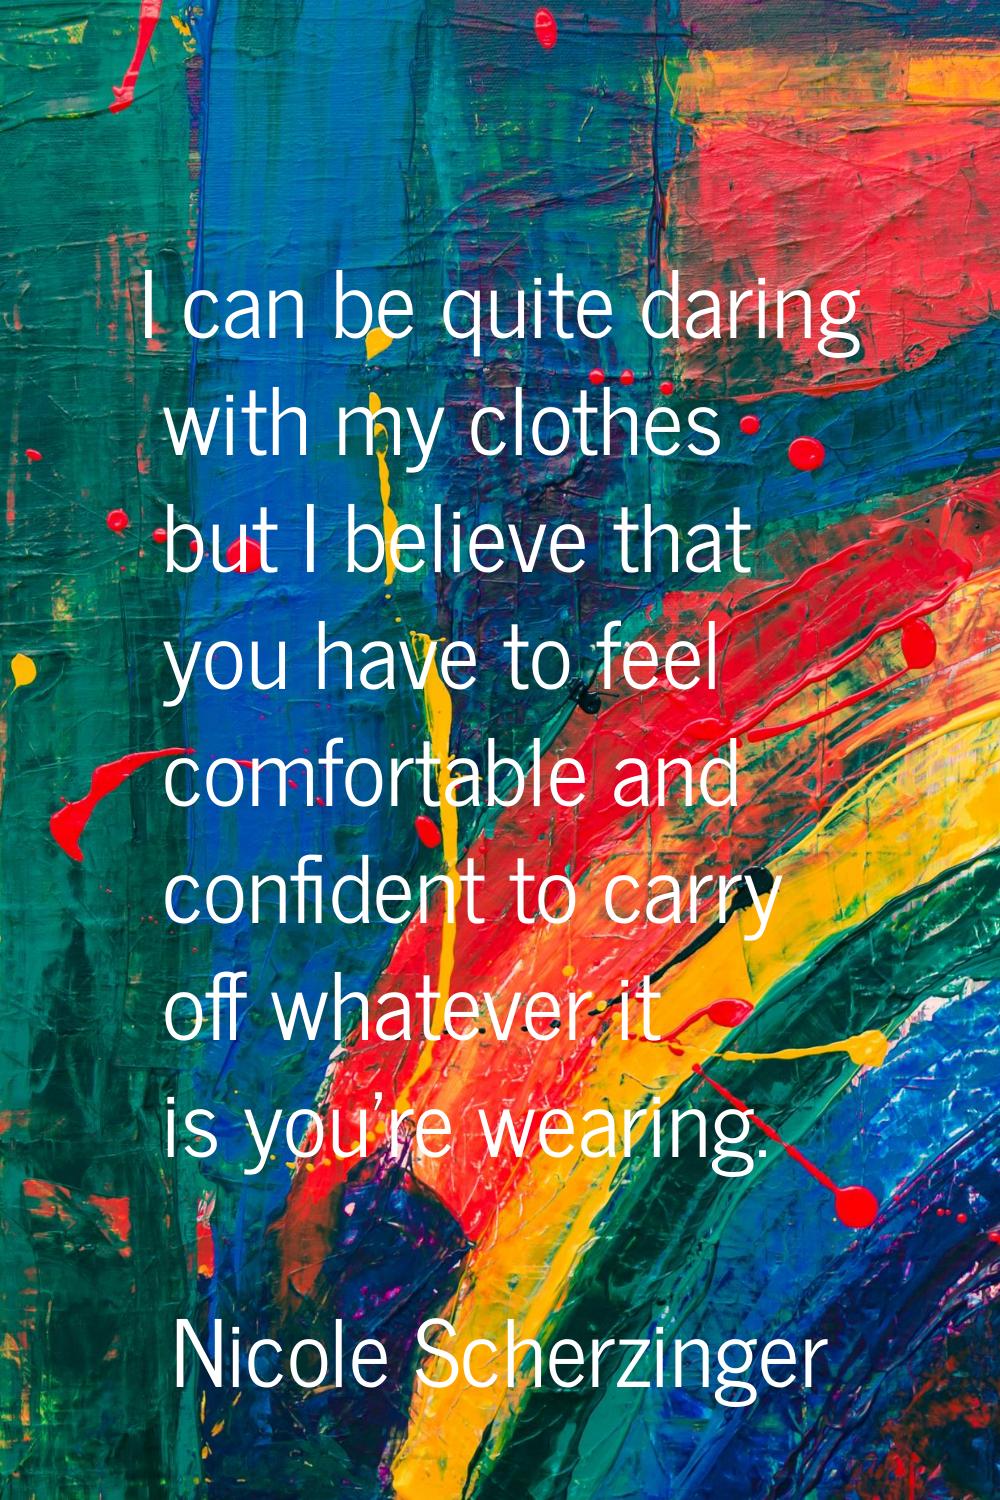 I can be quite daring with my clothes but I believe that you have to feel comfortable and confident